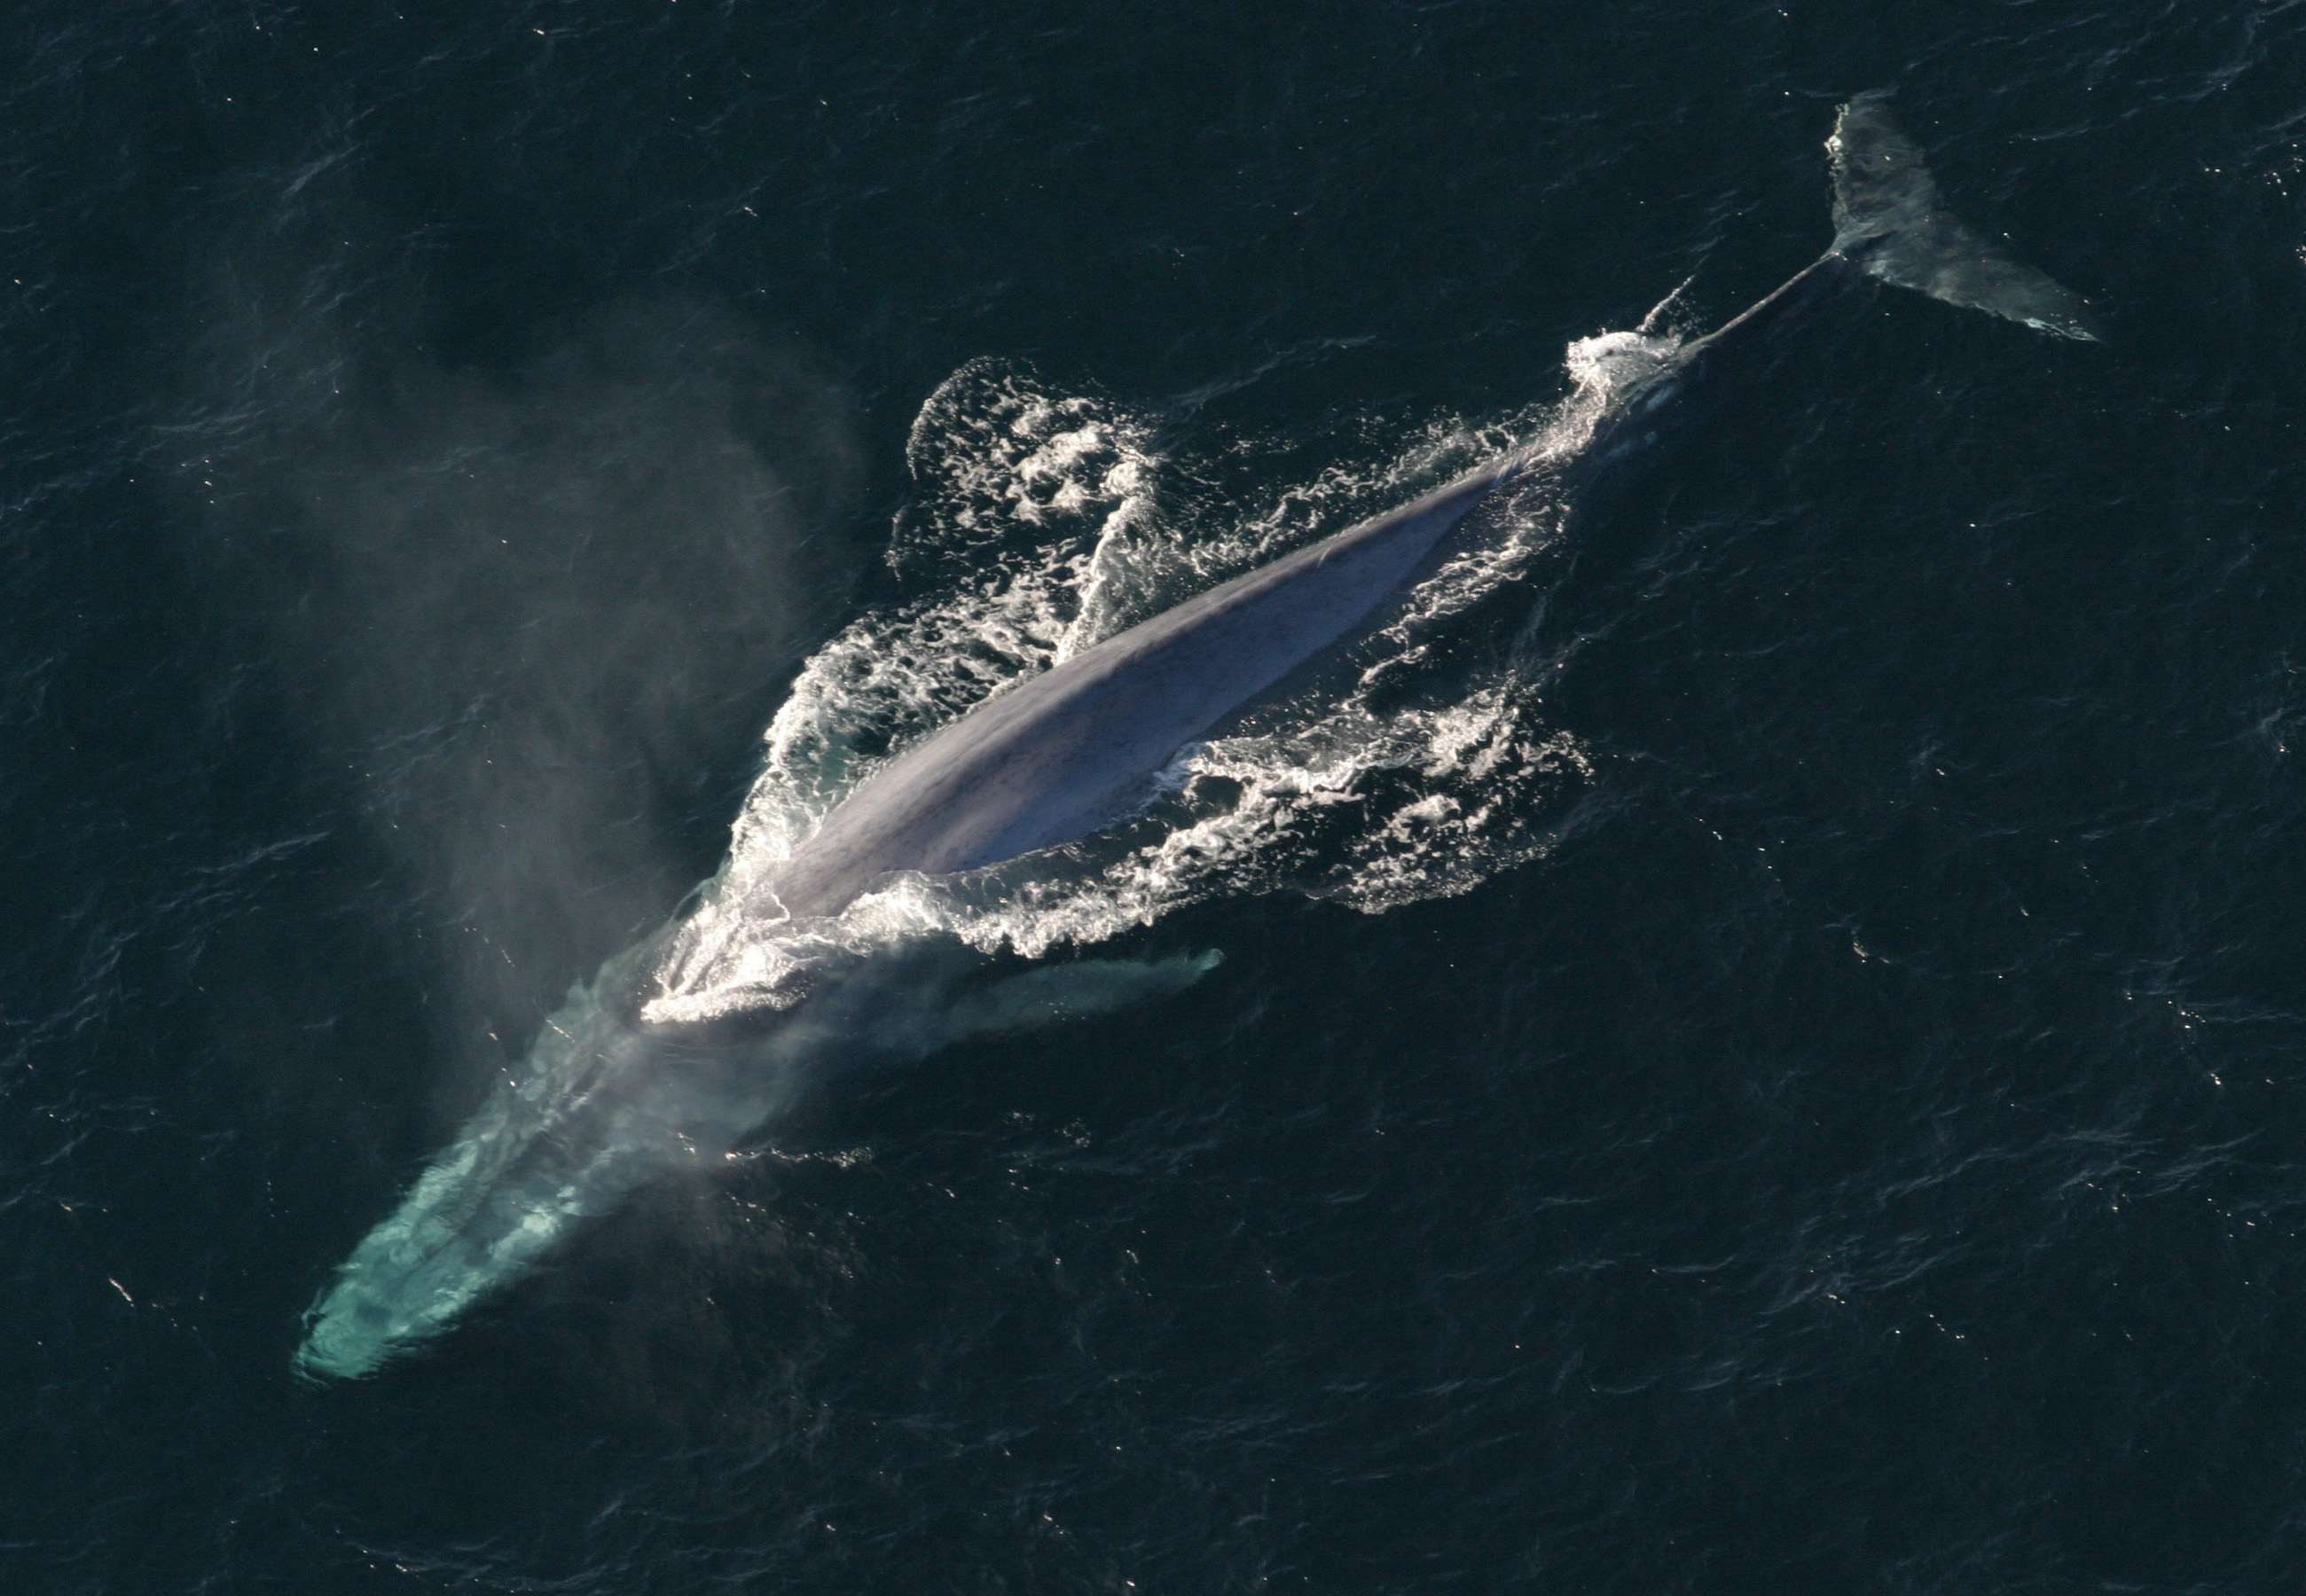 A giant whale in the ocean.